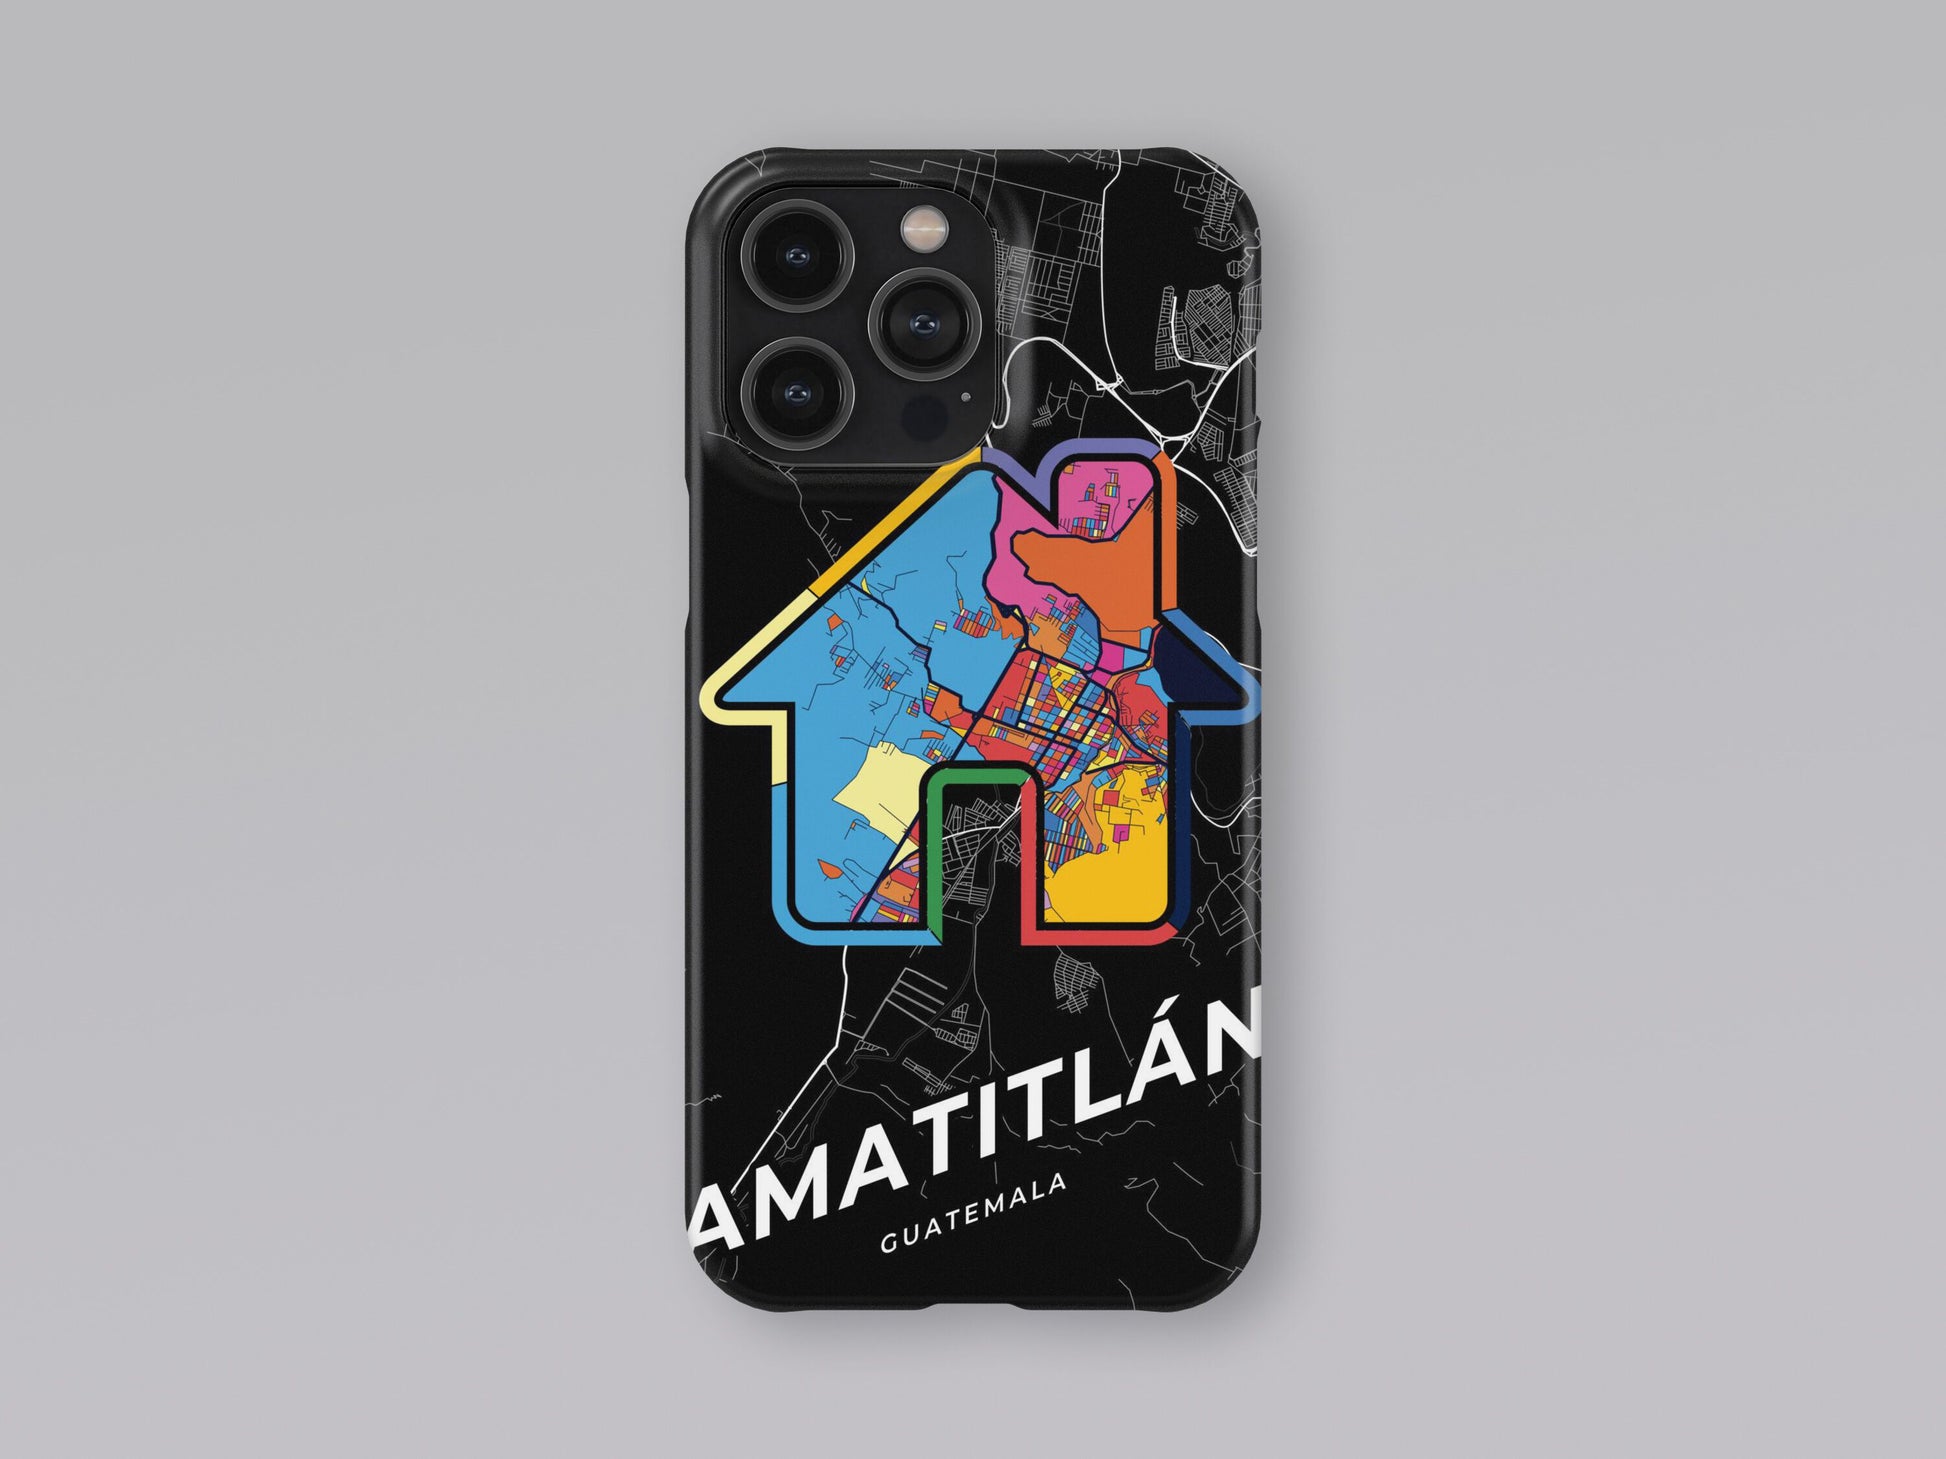 Amatitlán Guatemala slim phone case with colorful icon. Birthday, wedding or housewarming gift. Couple match cases. 3